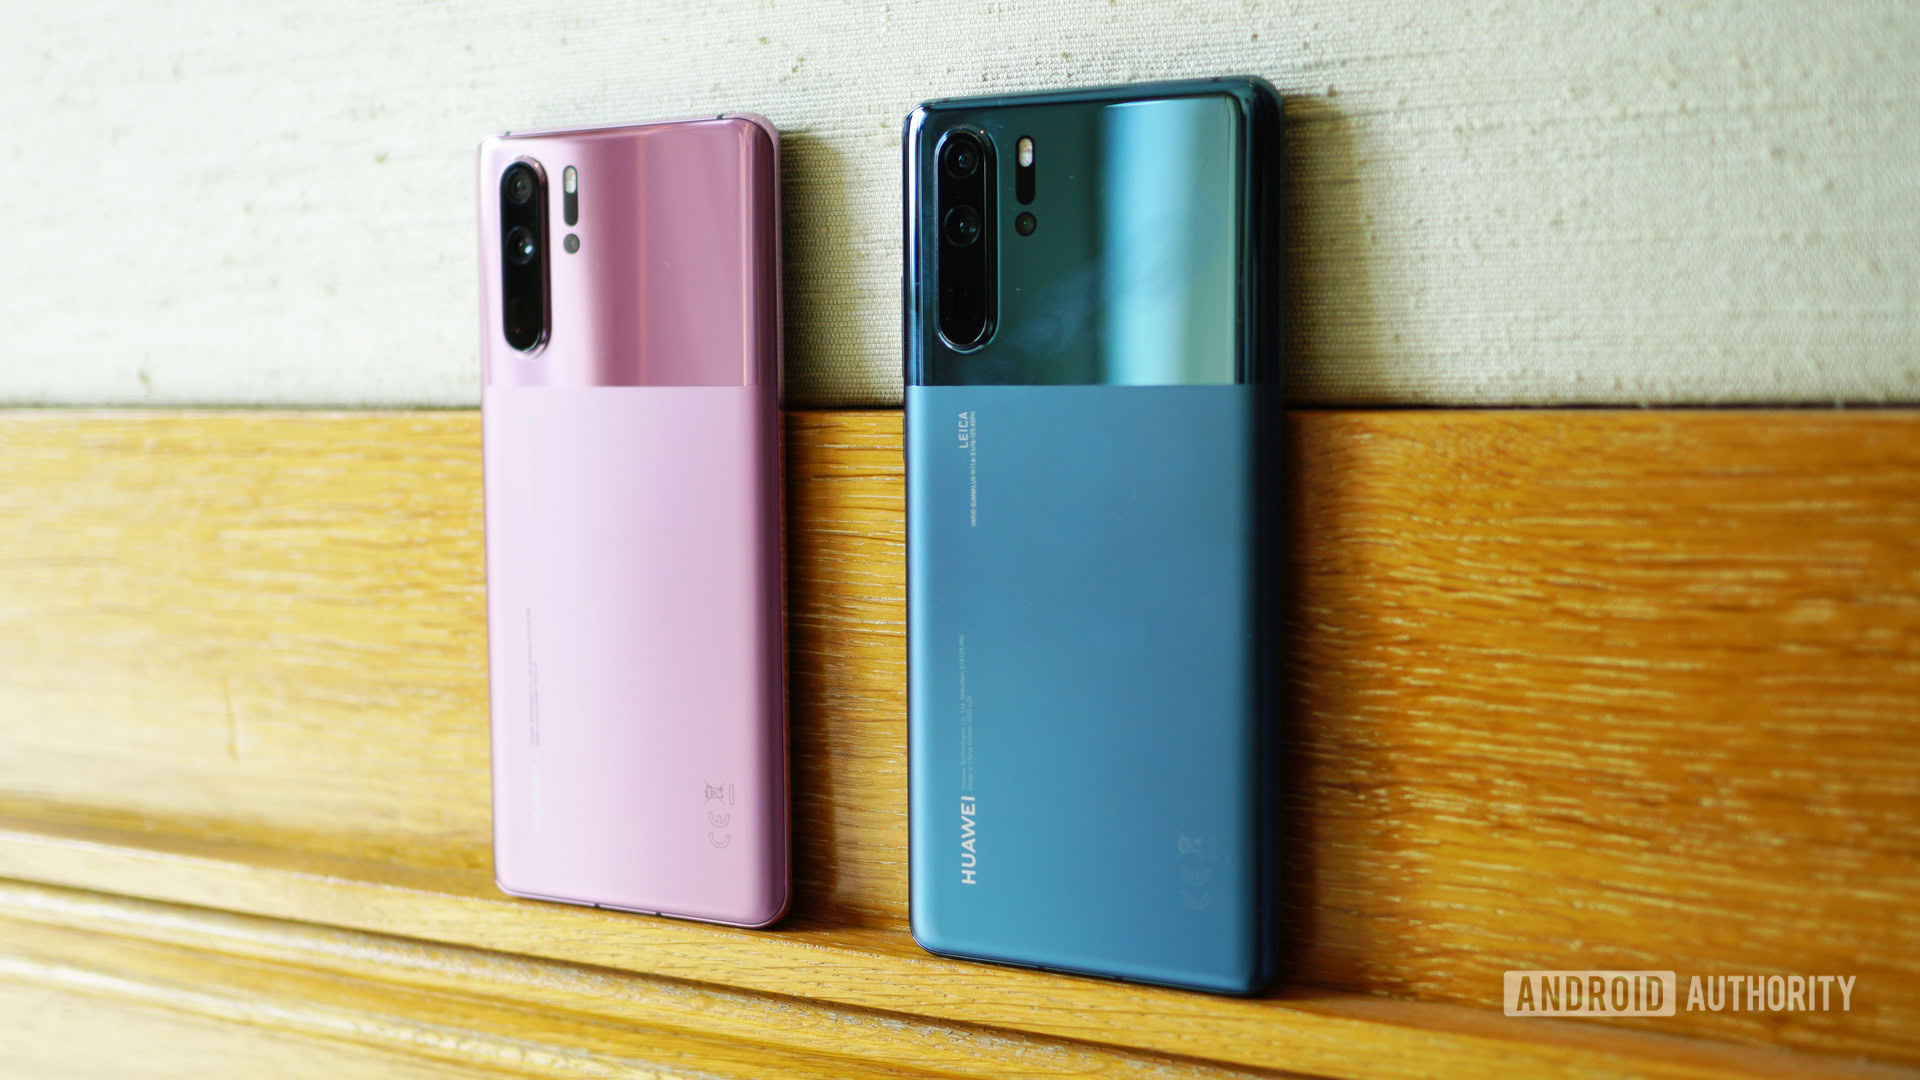 HUAWEI P30 Pro gets two new colors - Android Authority